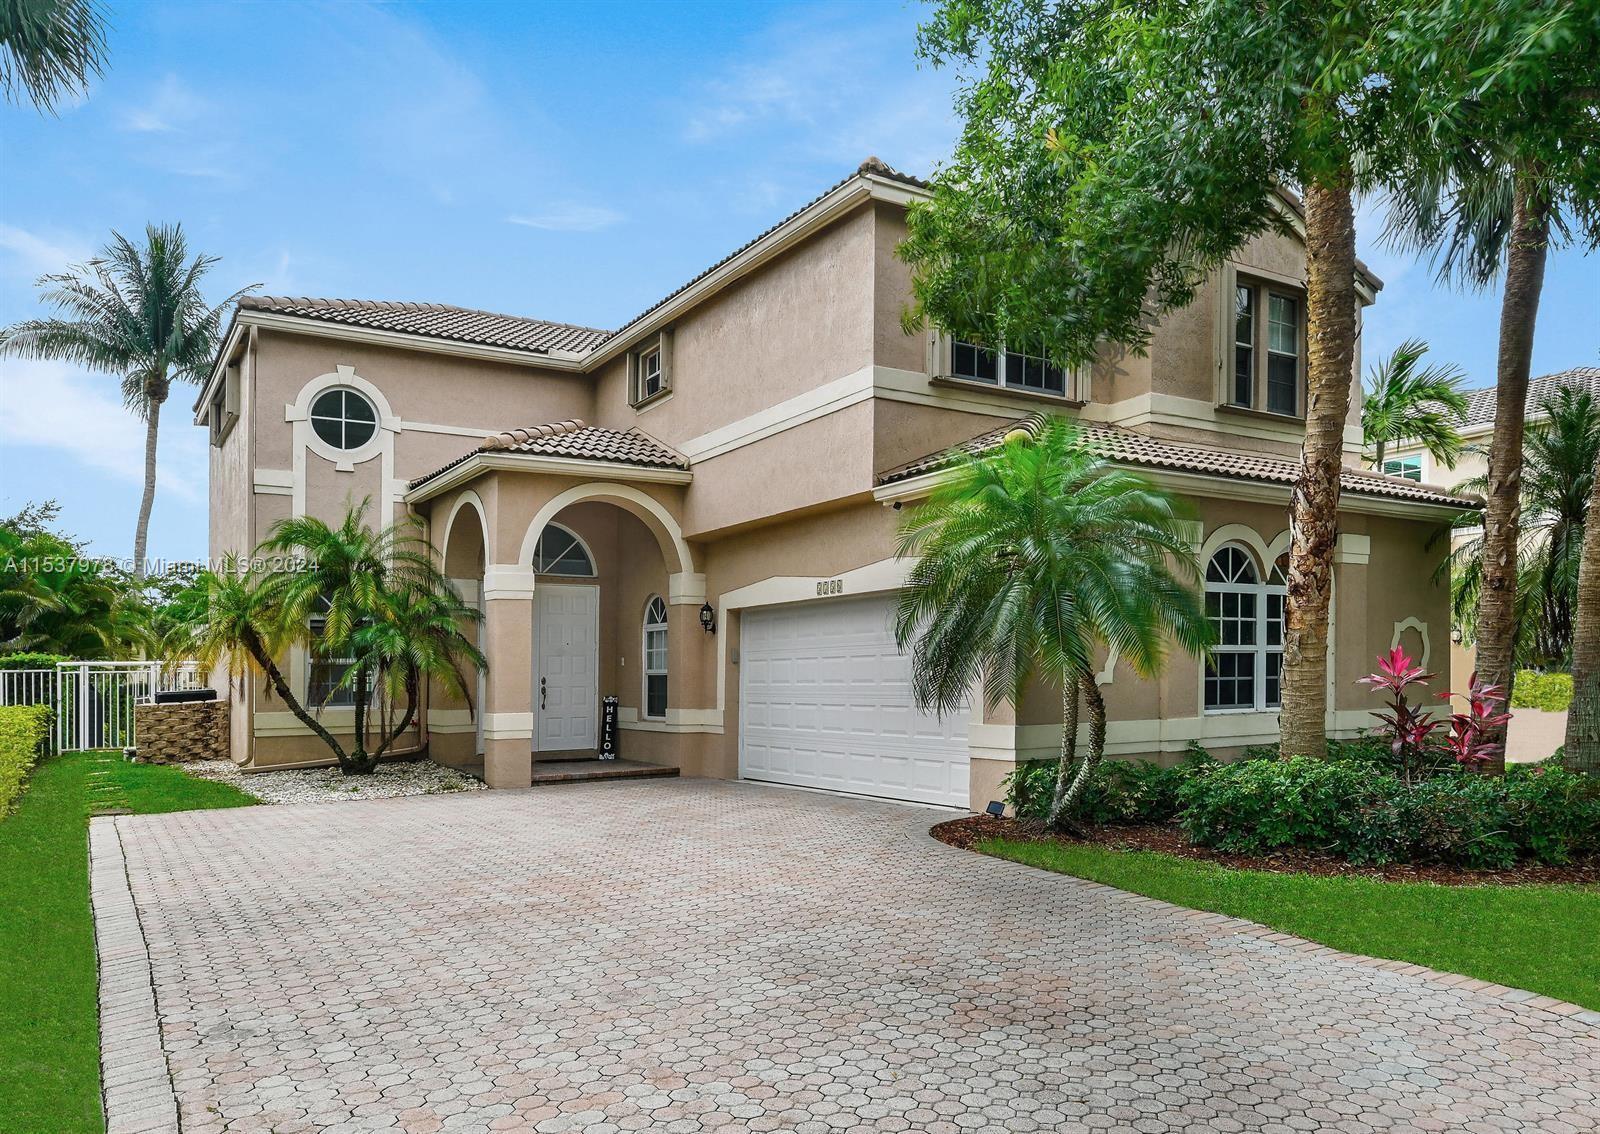 Photo of 5756 NW 49th Wy in Coconut Creek, FL